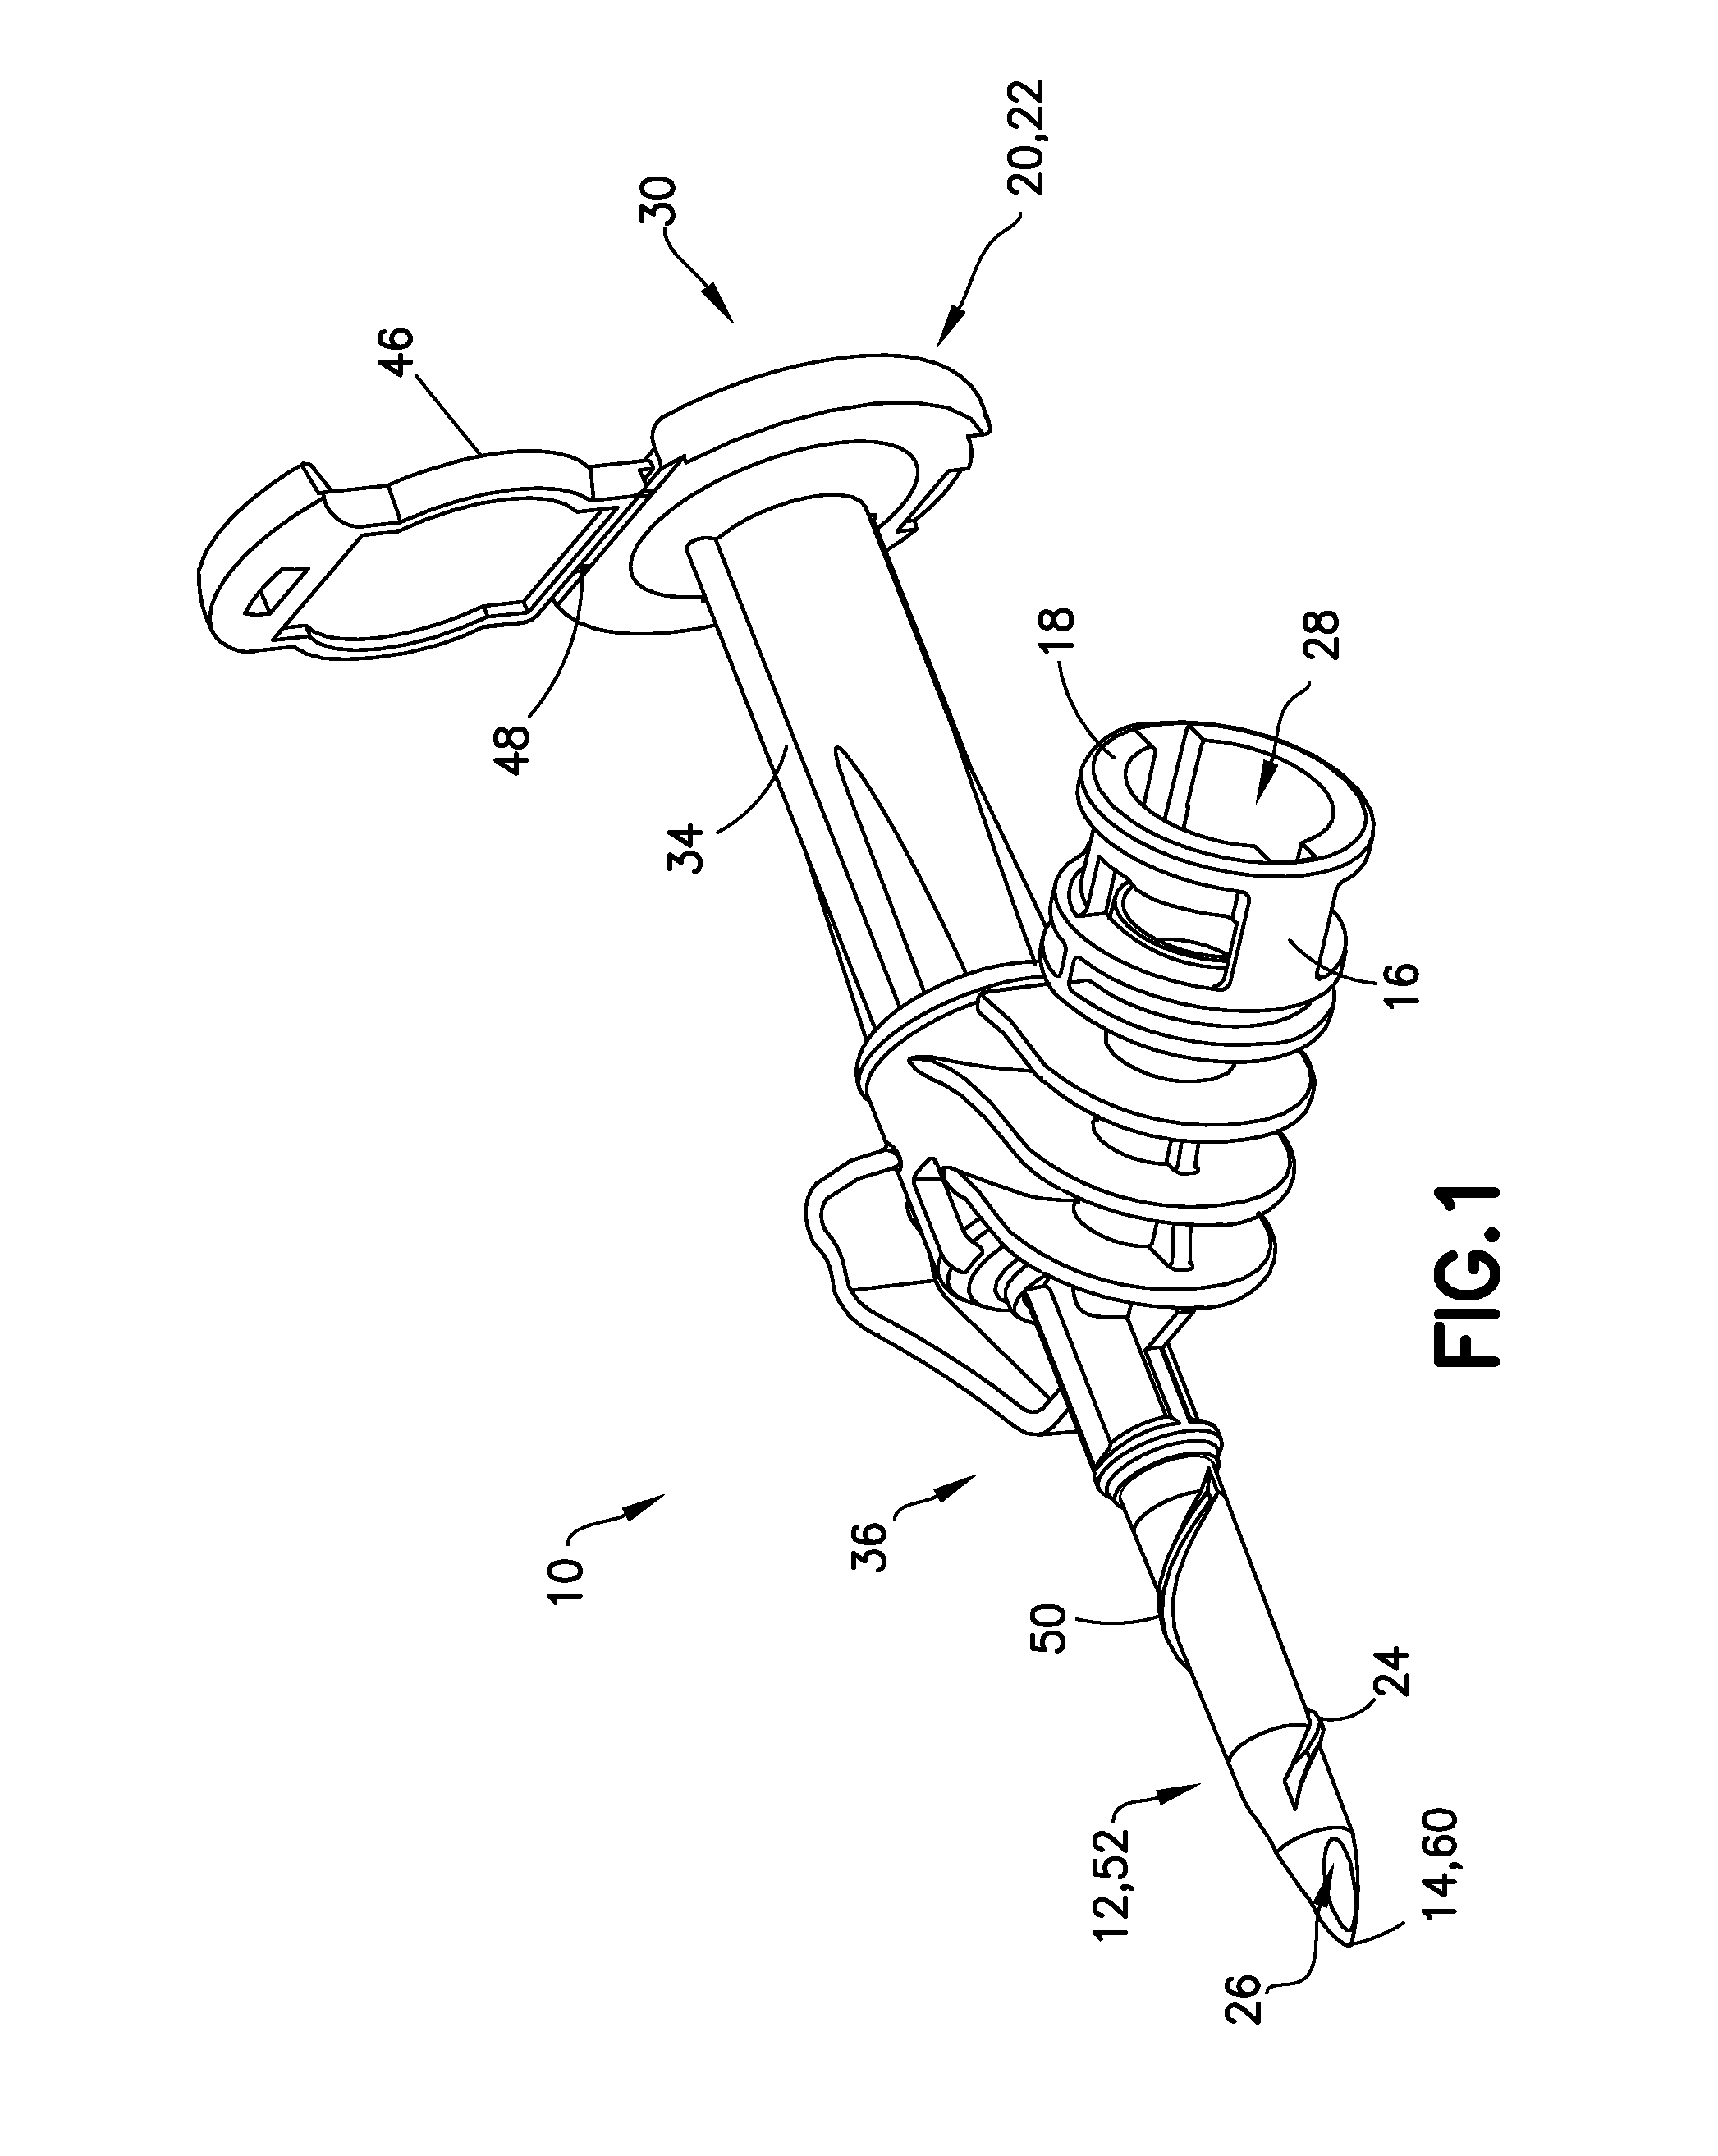 Infusion Adapter for Drug Transfer Assembly